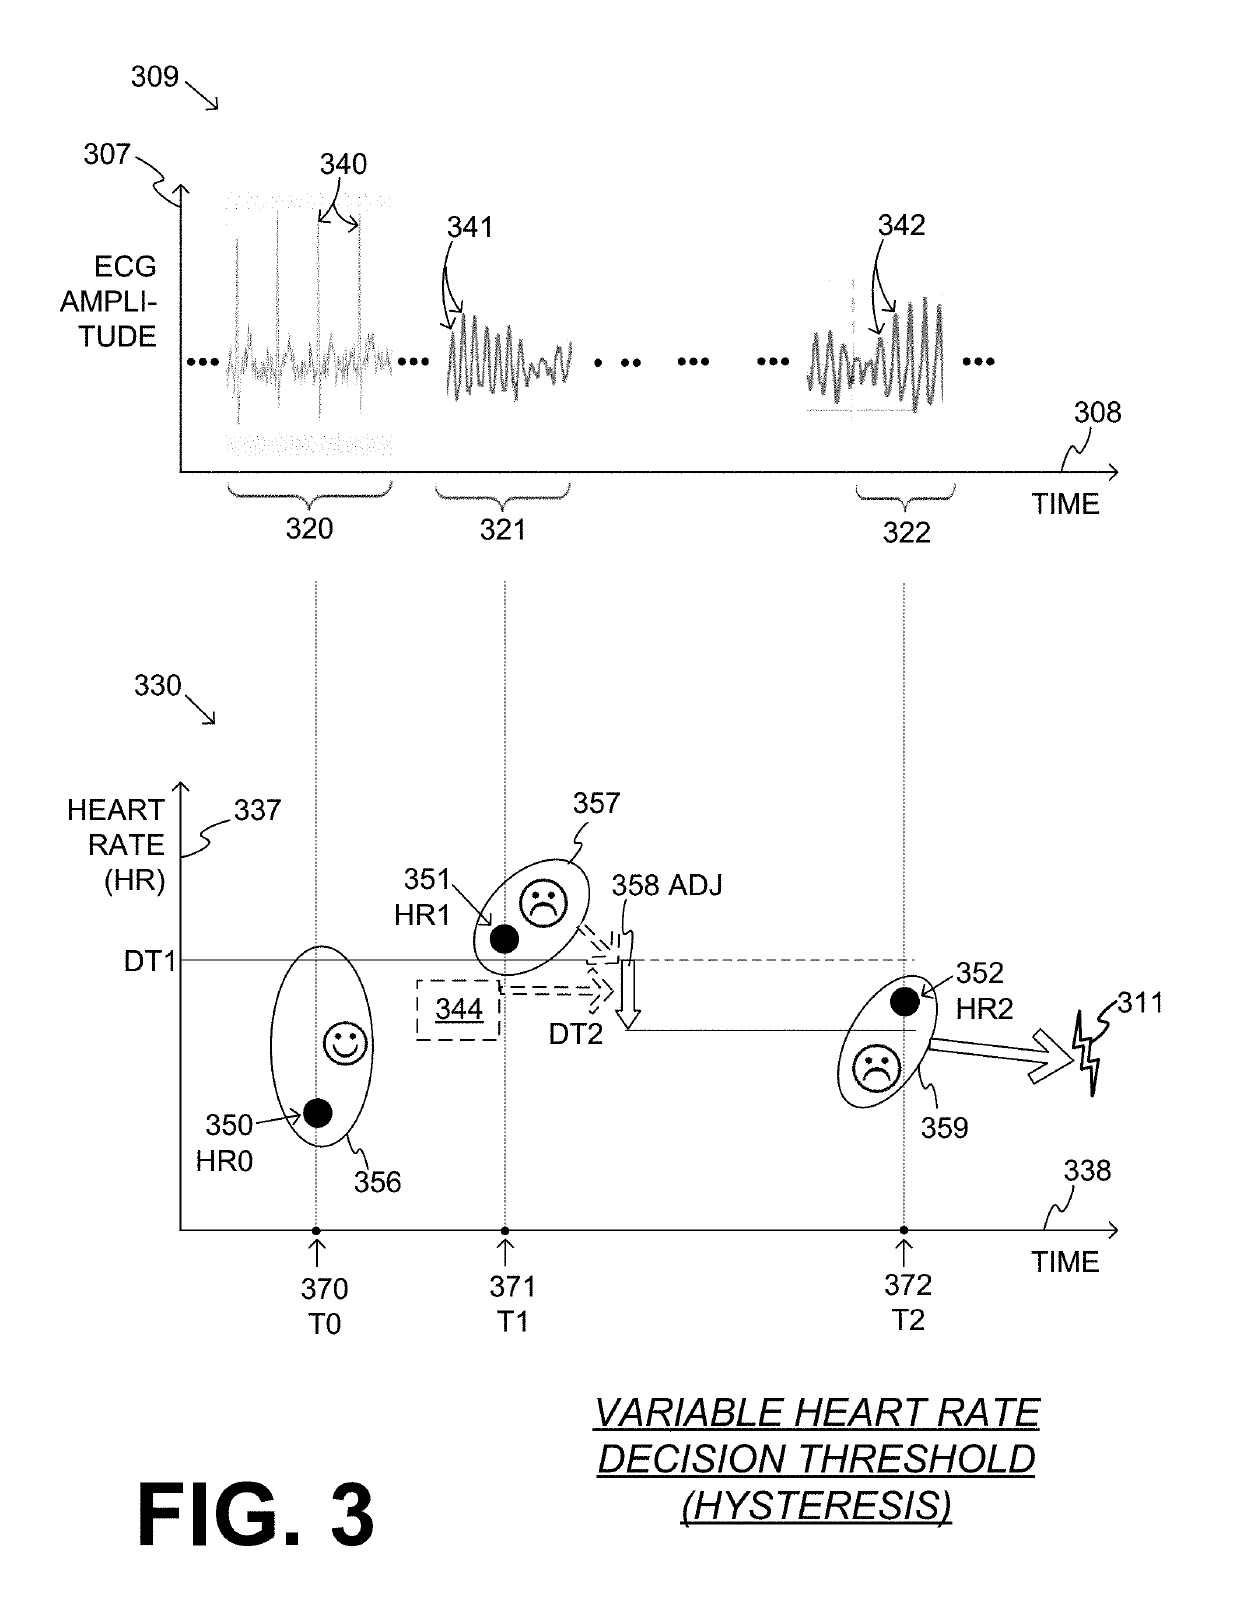 Wearable cardioverter defibrillator (WCD) system detecting ventricular tachycardia and/or ventricular fibrillation using variable heart rate decision threshold